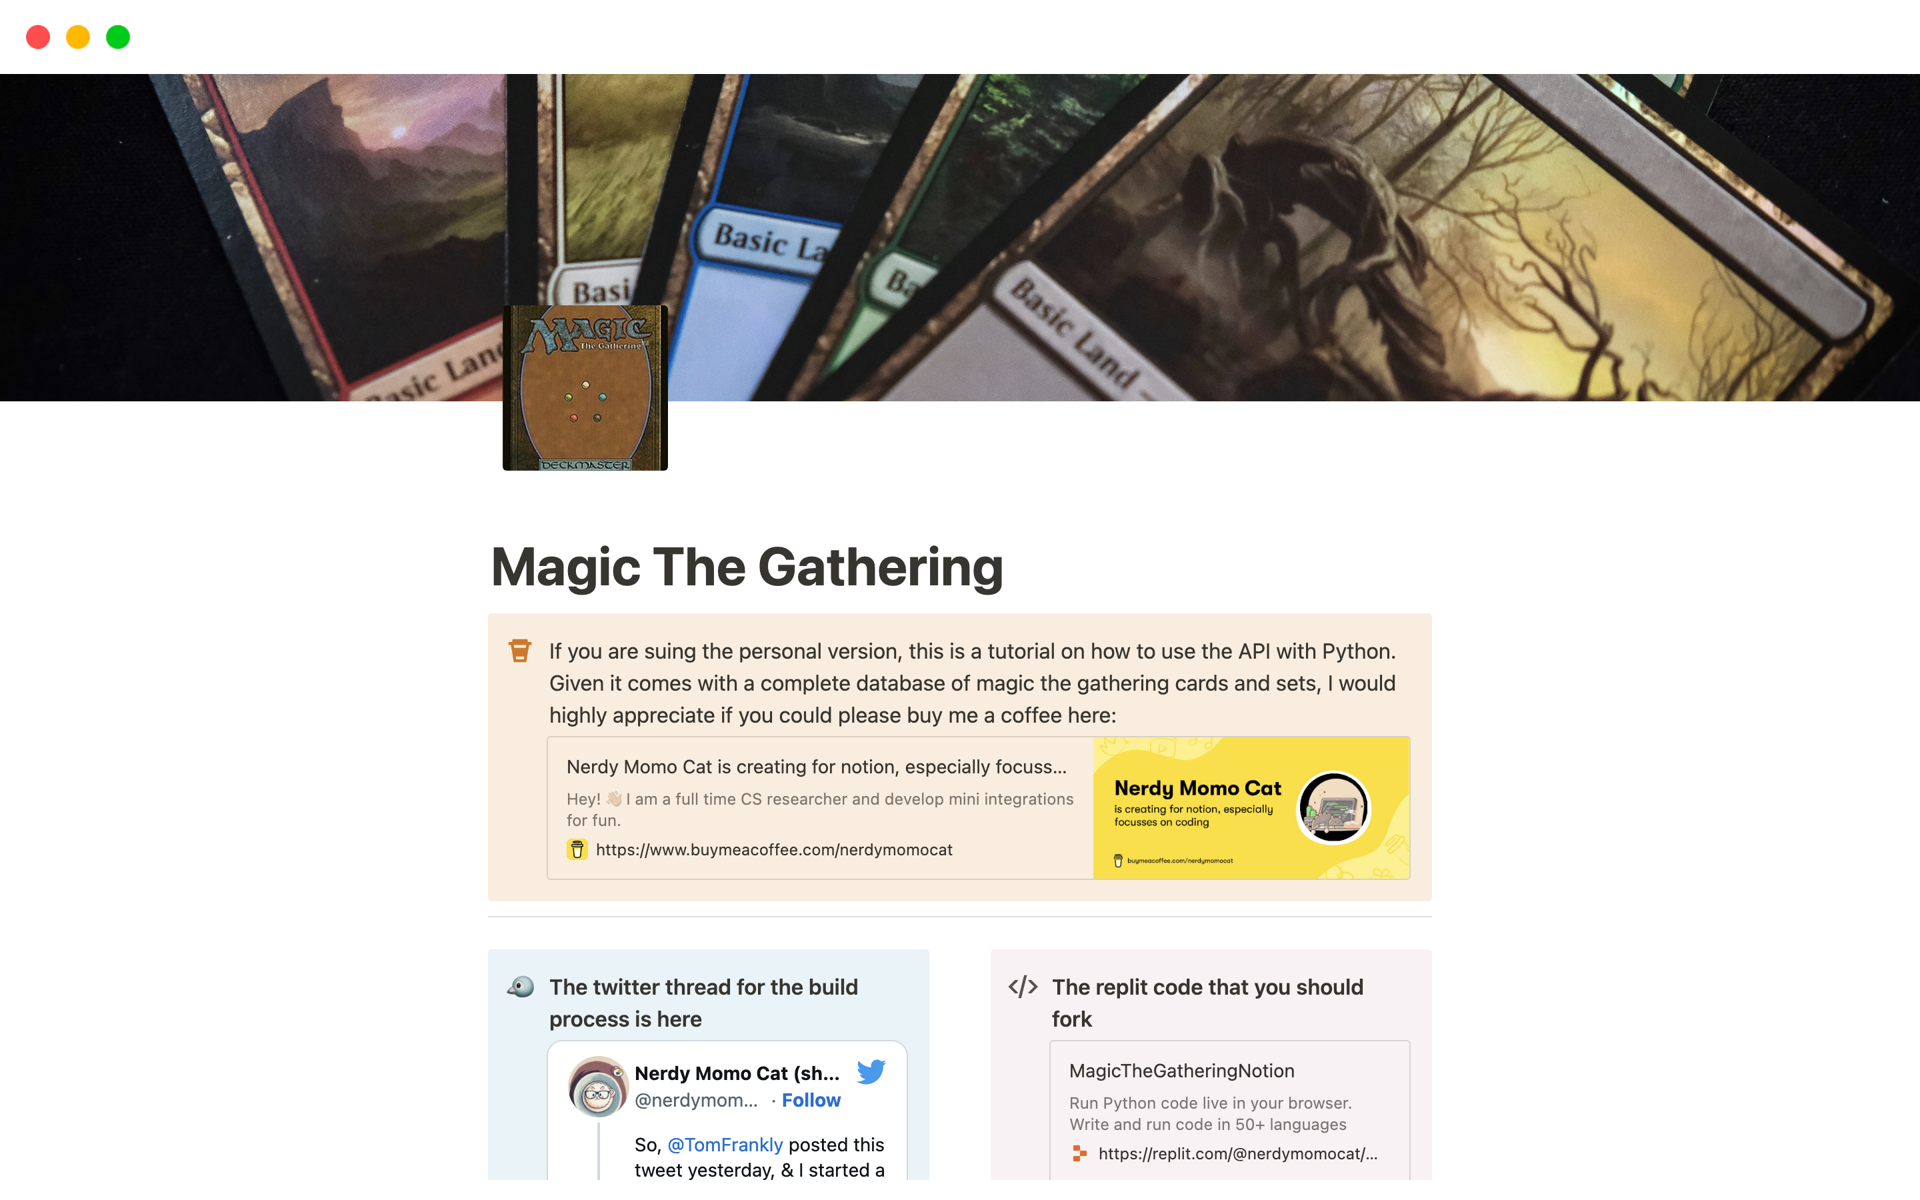 Database for Magic The Gathering cards